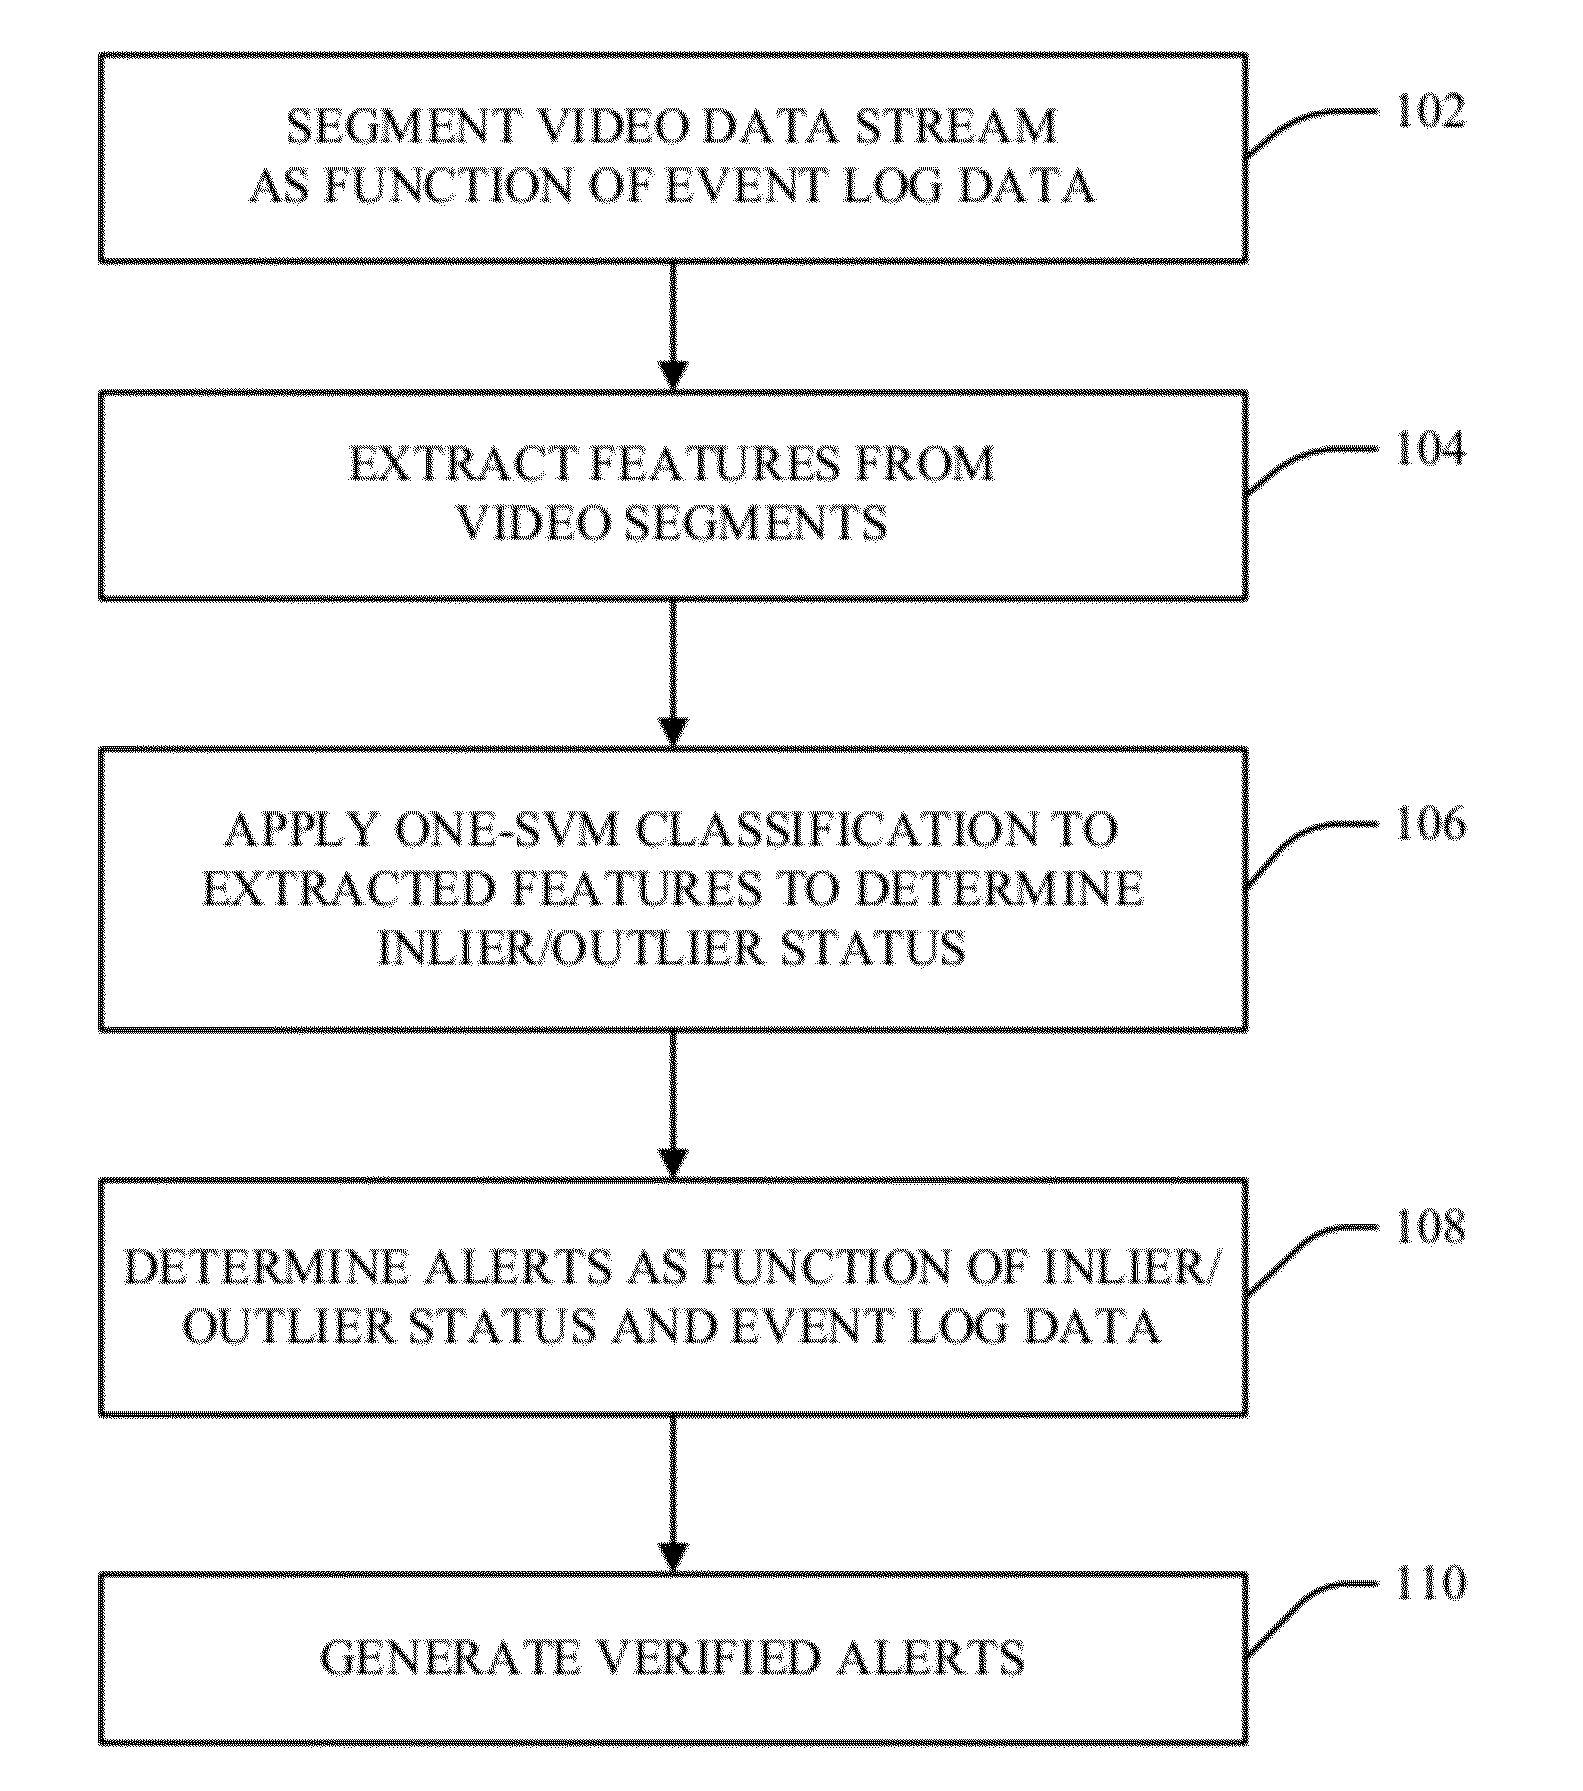 Activity determination as function of transaction log